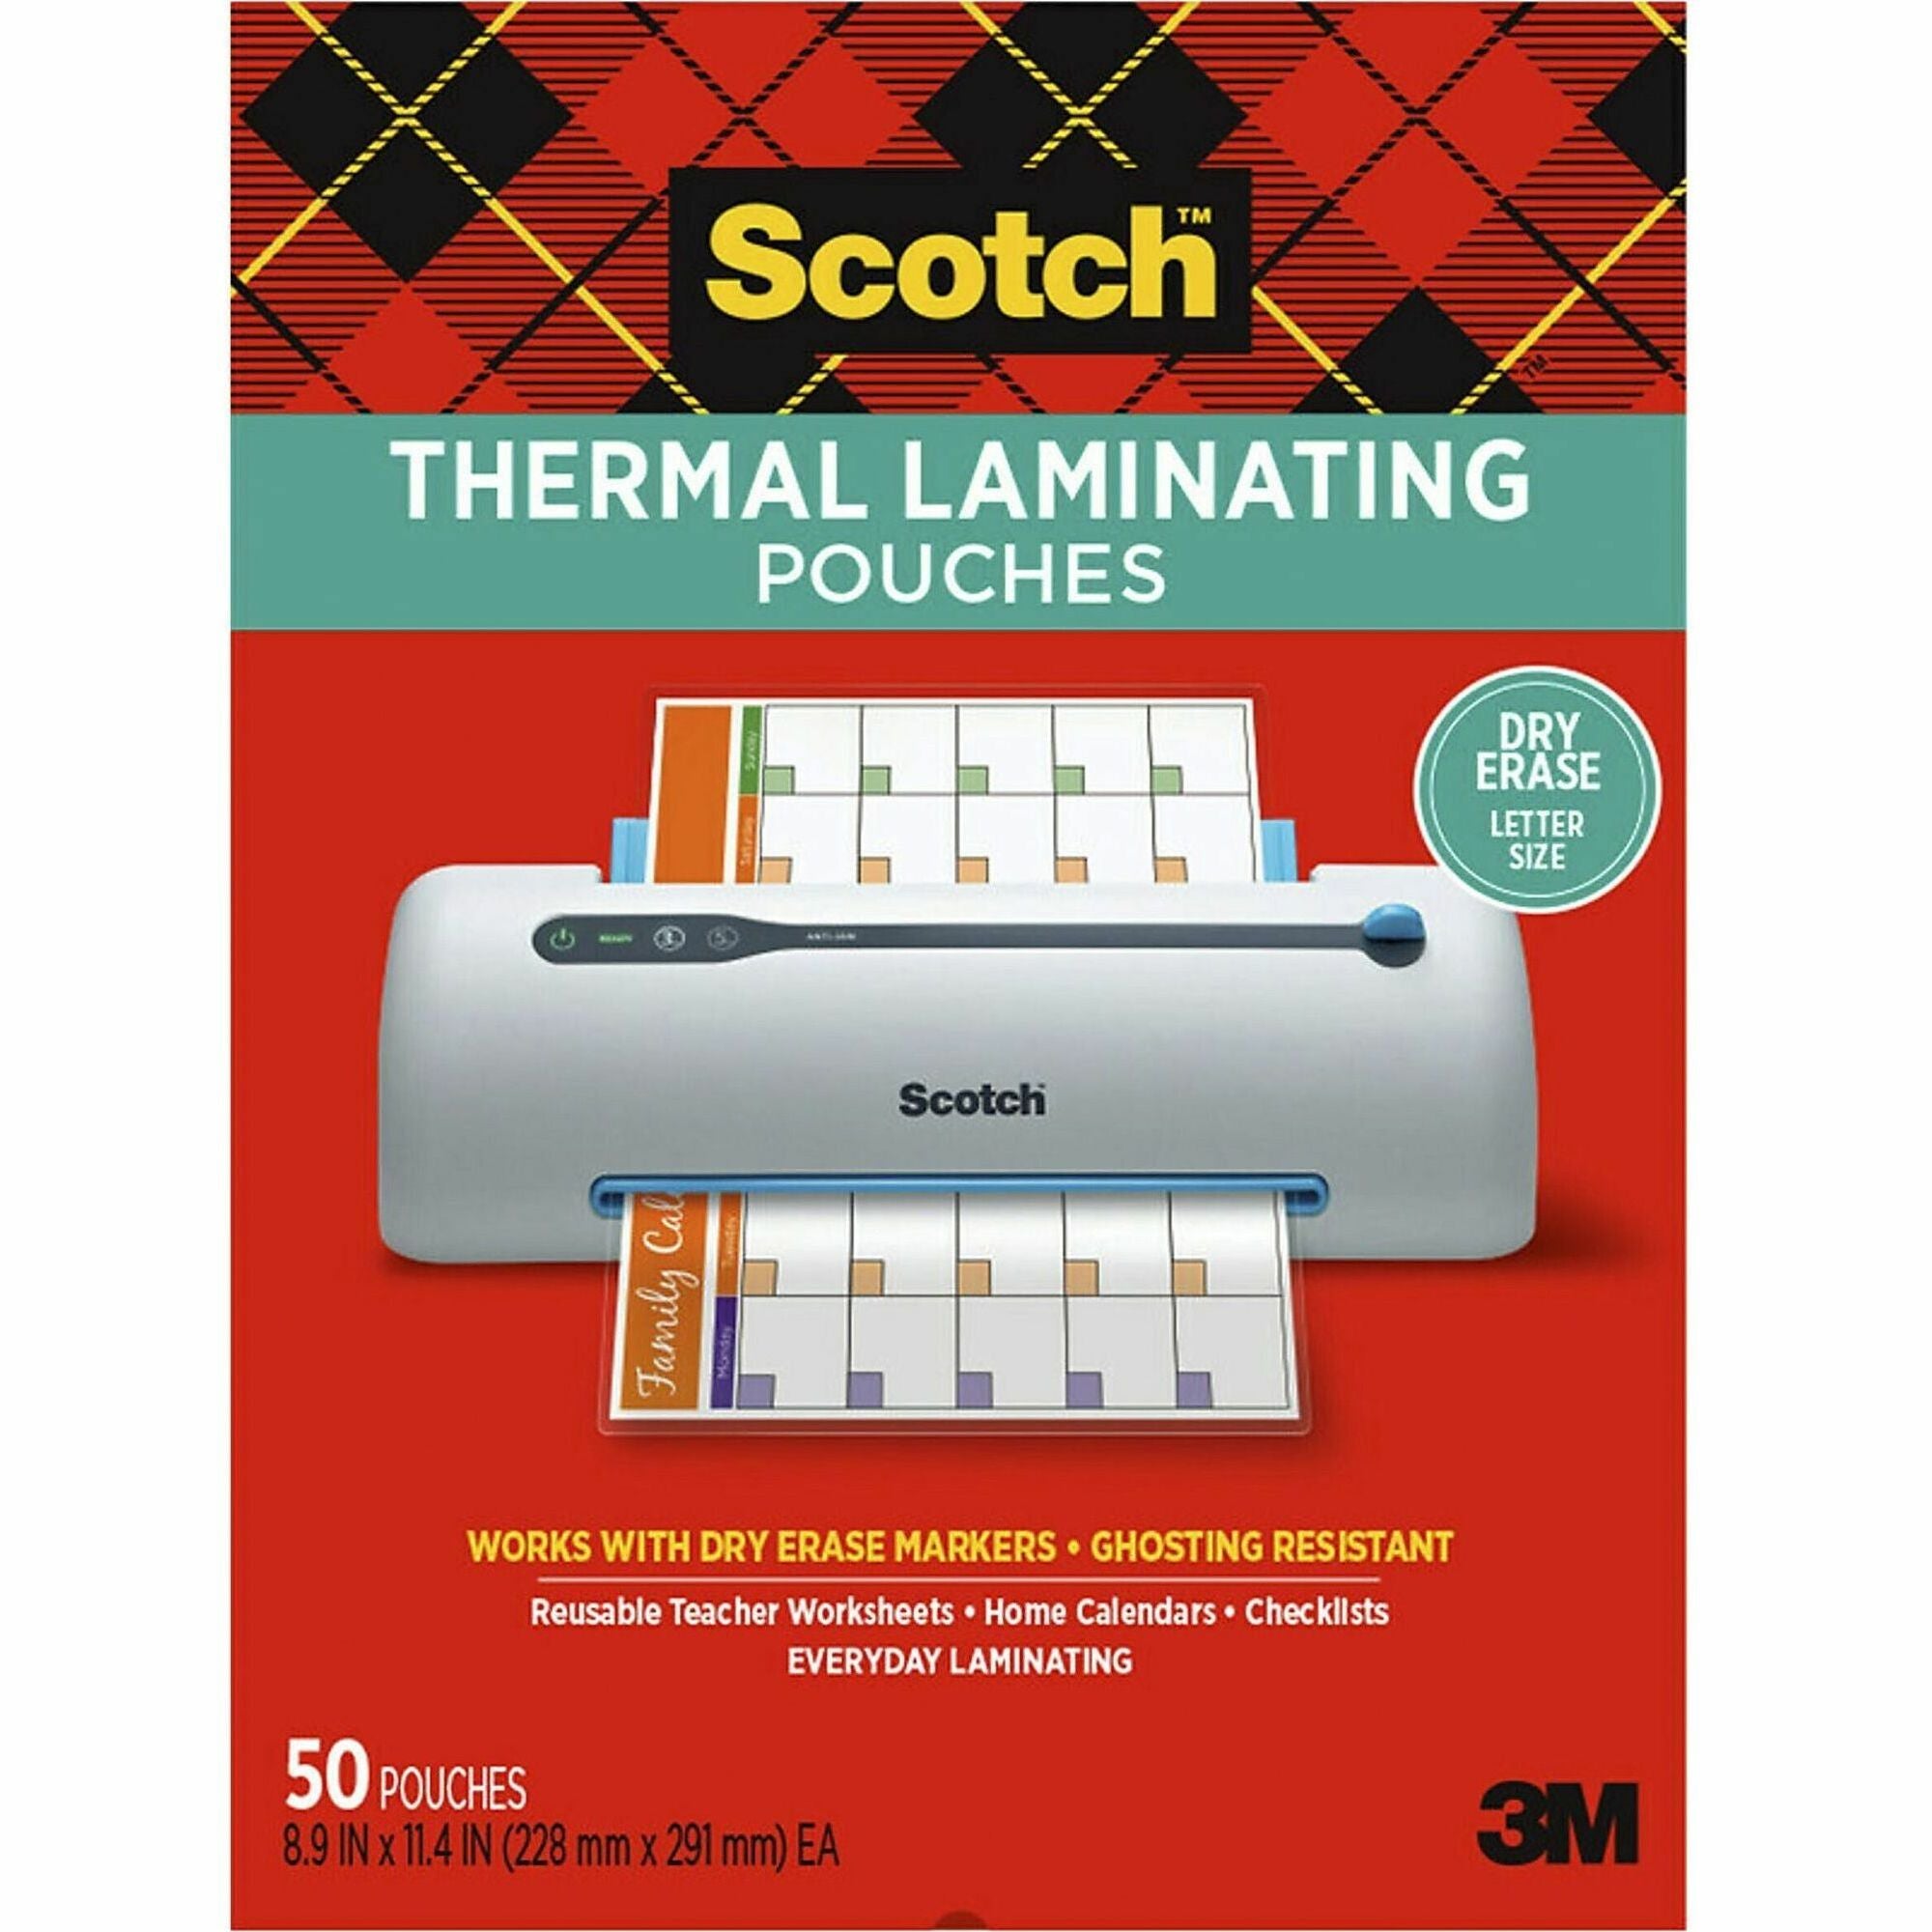 scotch-laminating-pouch-sheet-size-supported-letter-laminating-pouch-sheet-size-890-width-x-1140-length-for-document-artwork-sign-flyer-schedule-certificate-home-office-classroom-paper-photo-safe-tear-proof-spill-resistant-_mmmtp385450de - 1